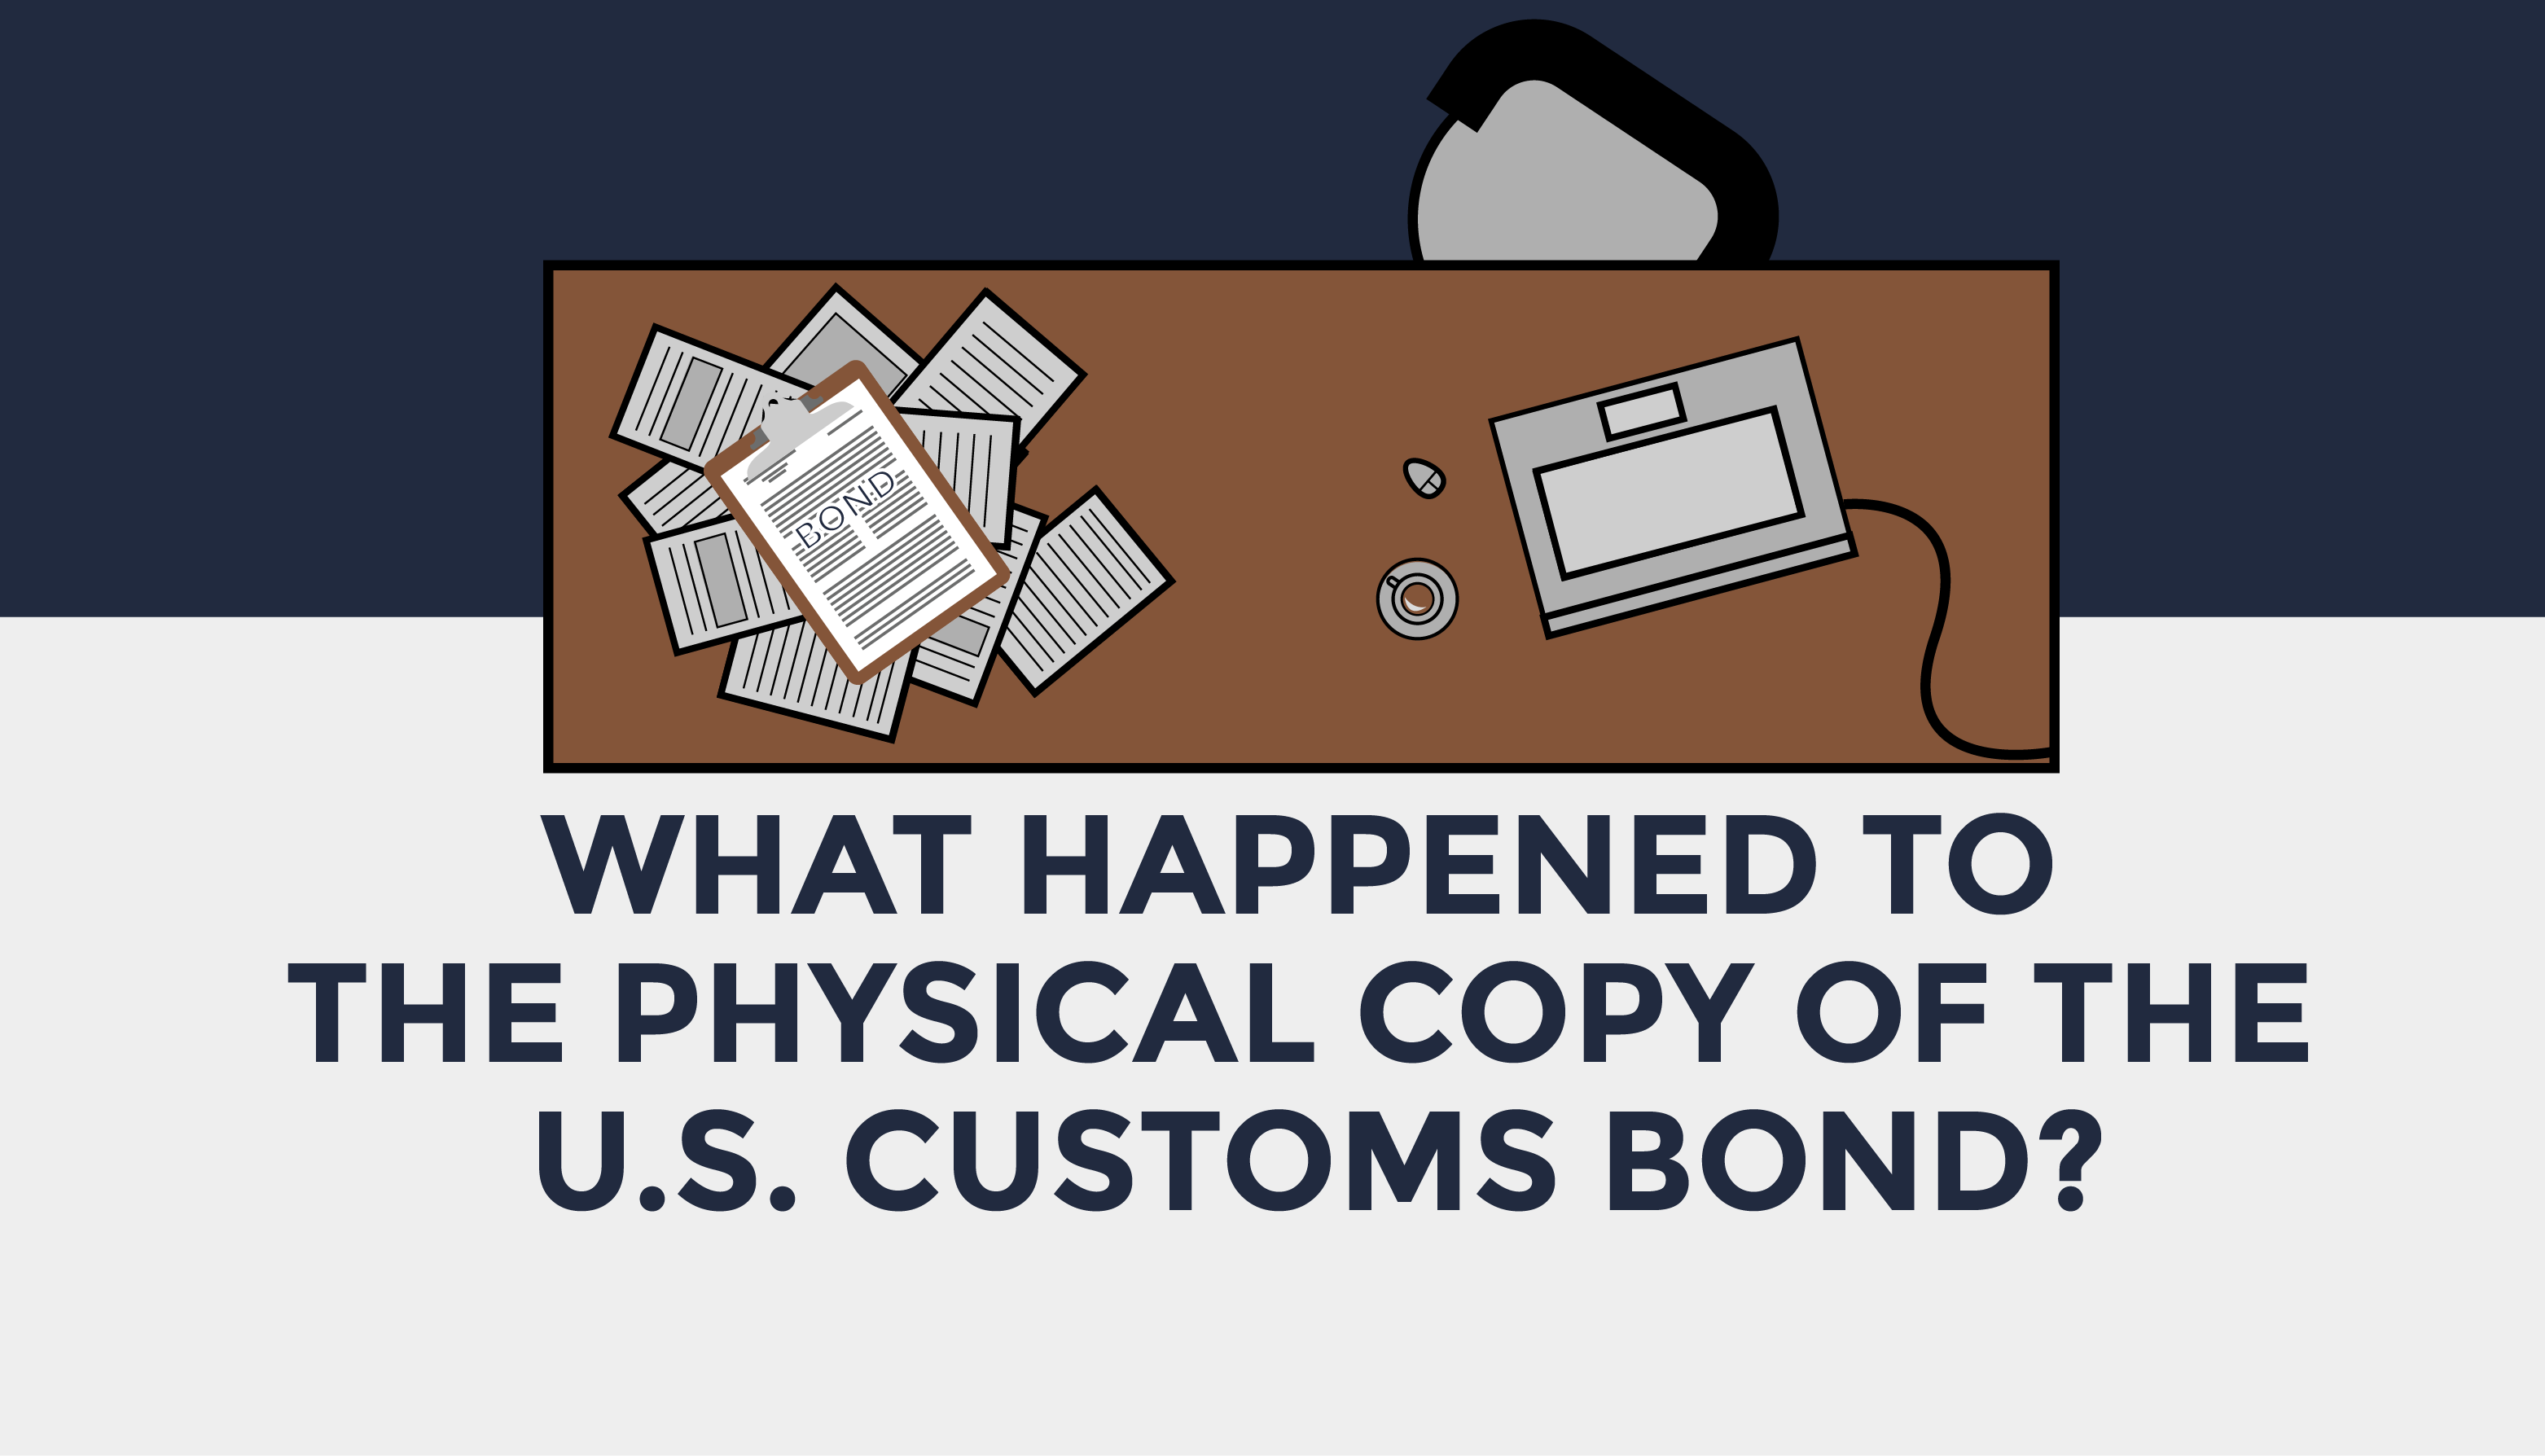 Trade Risk Guaranty explains what happened to the physical copy of the U.S. Customs Bond.